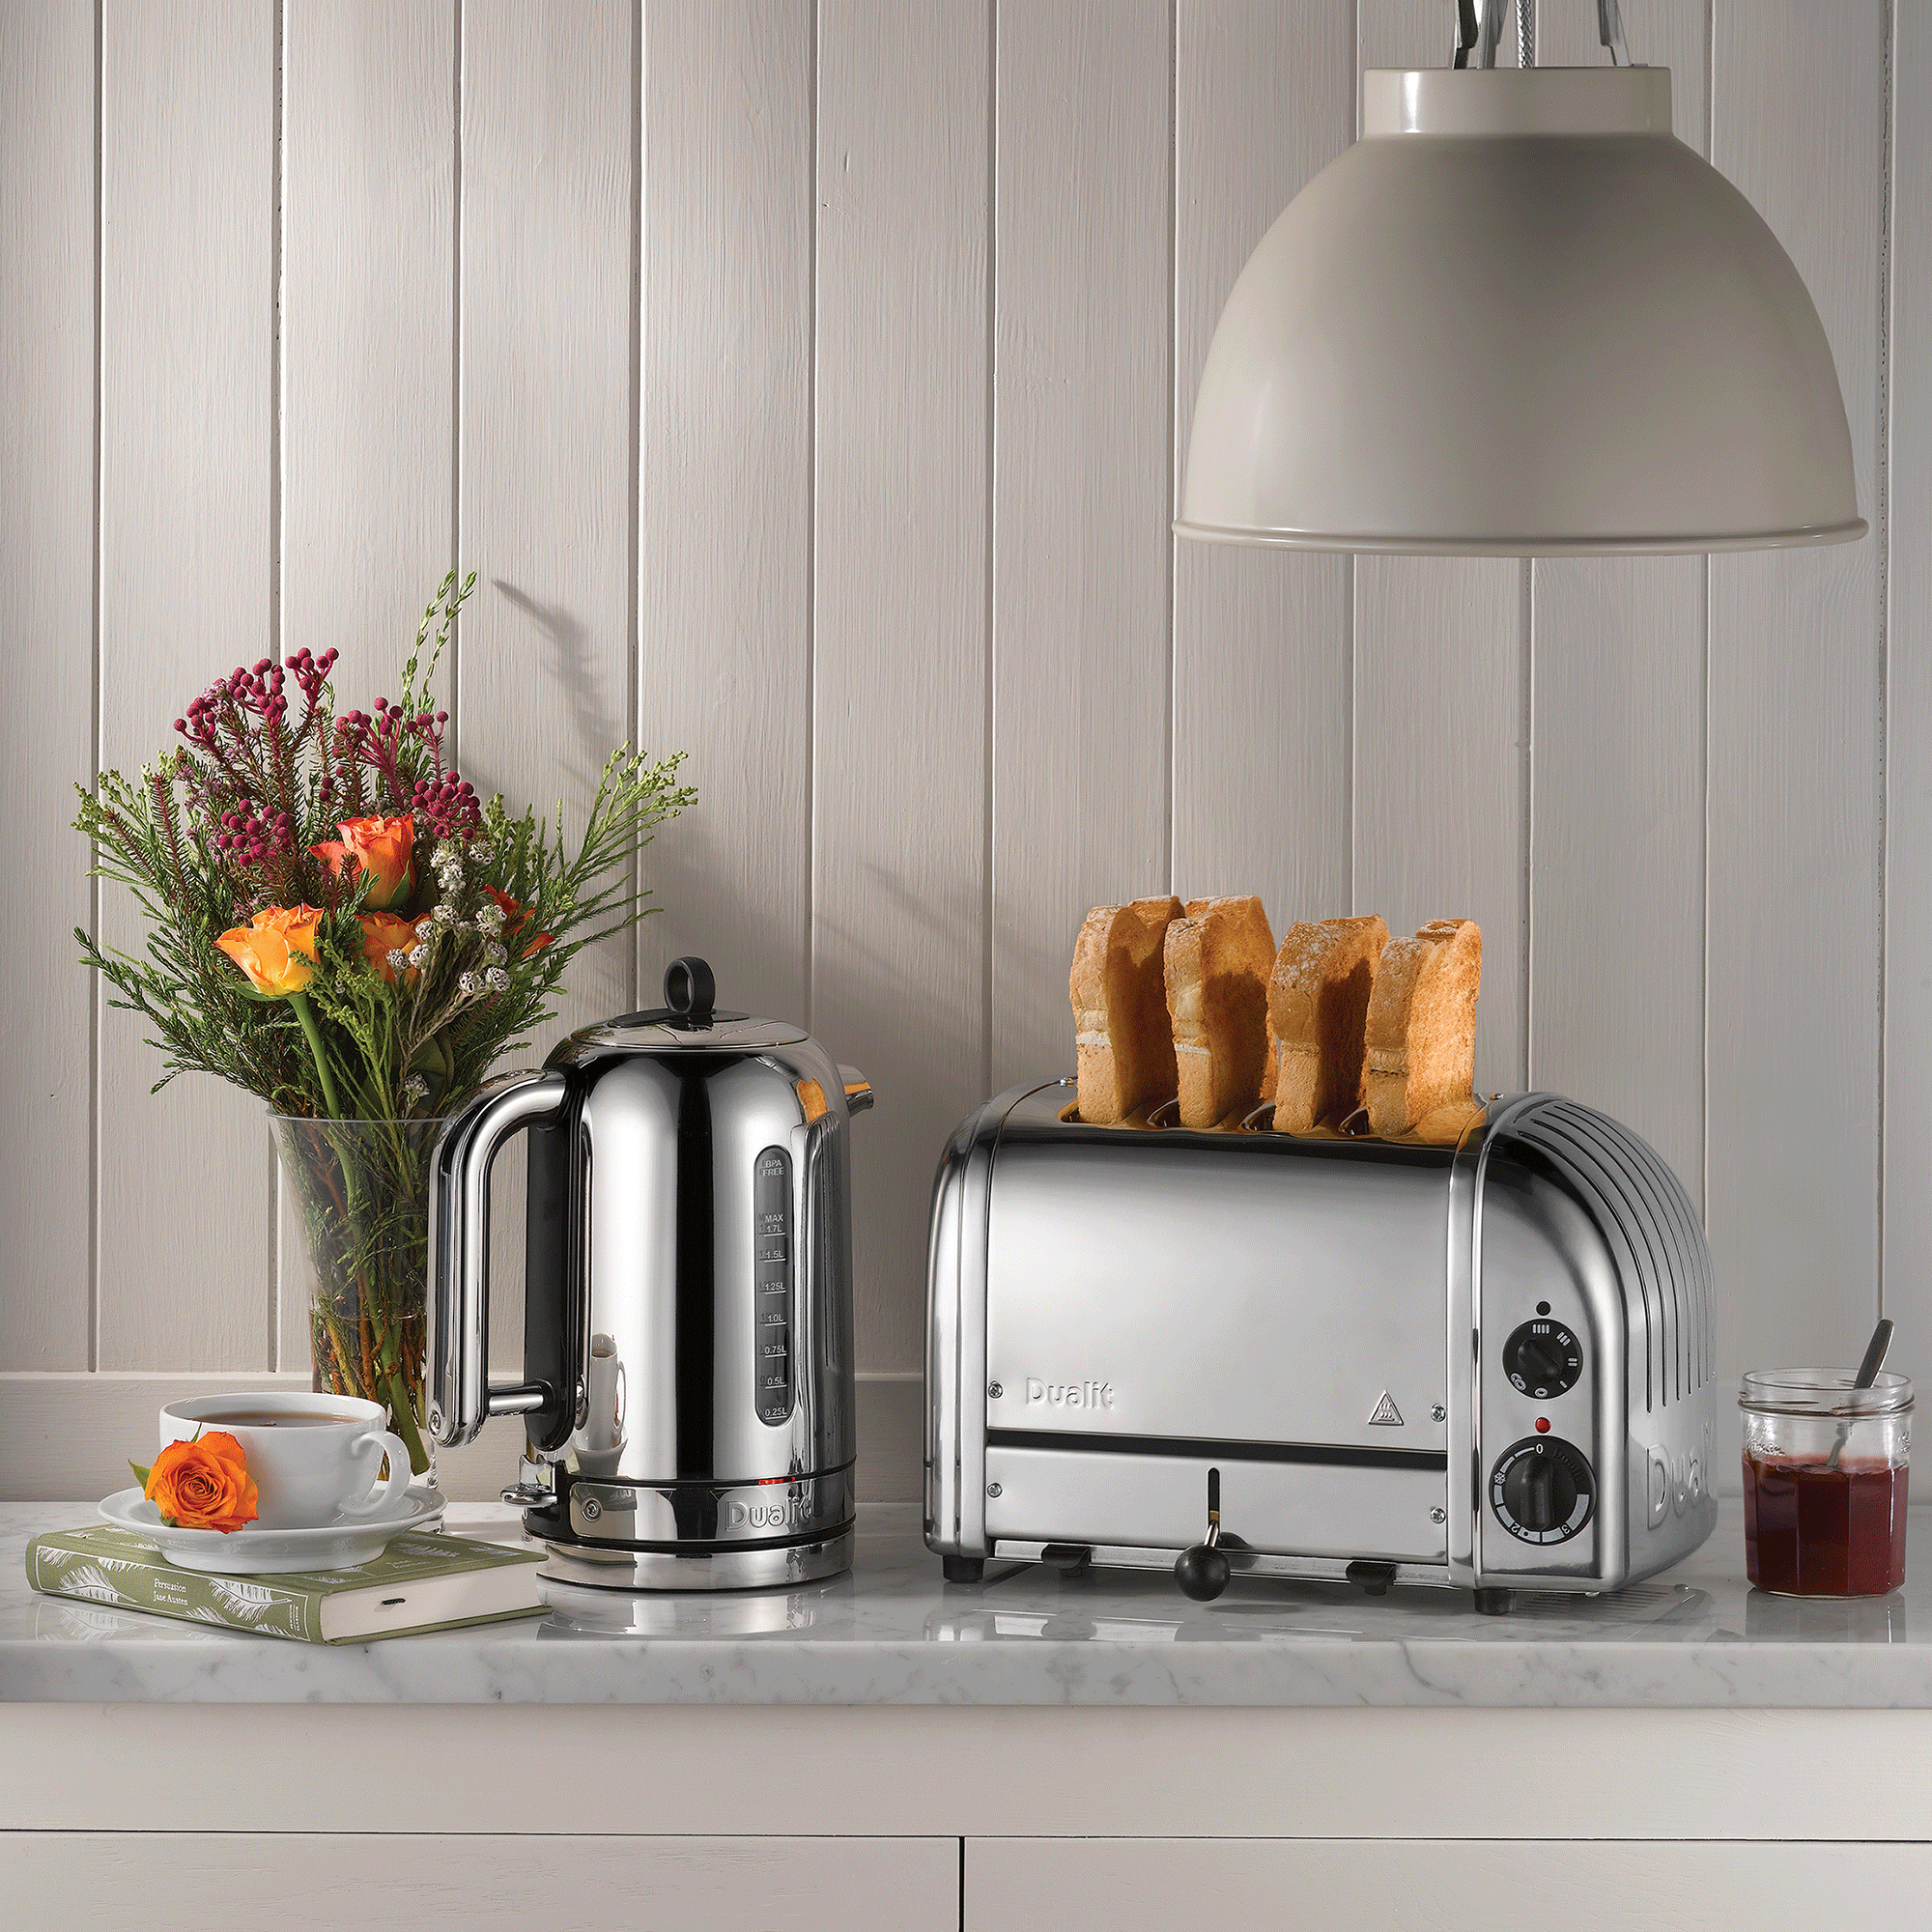 Dualit silver toaster